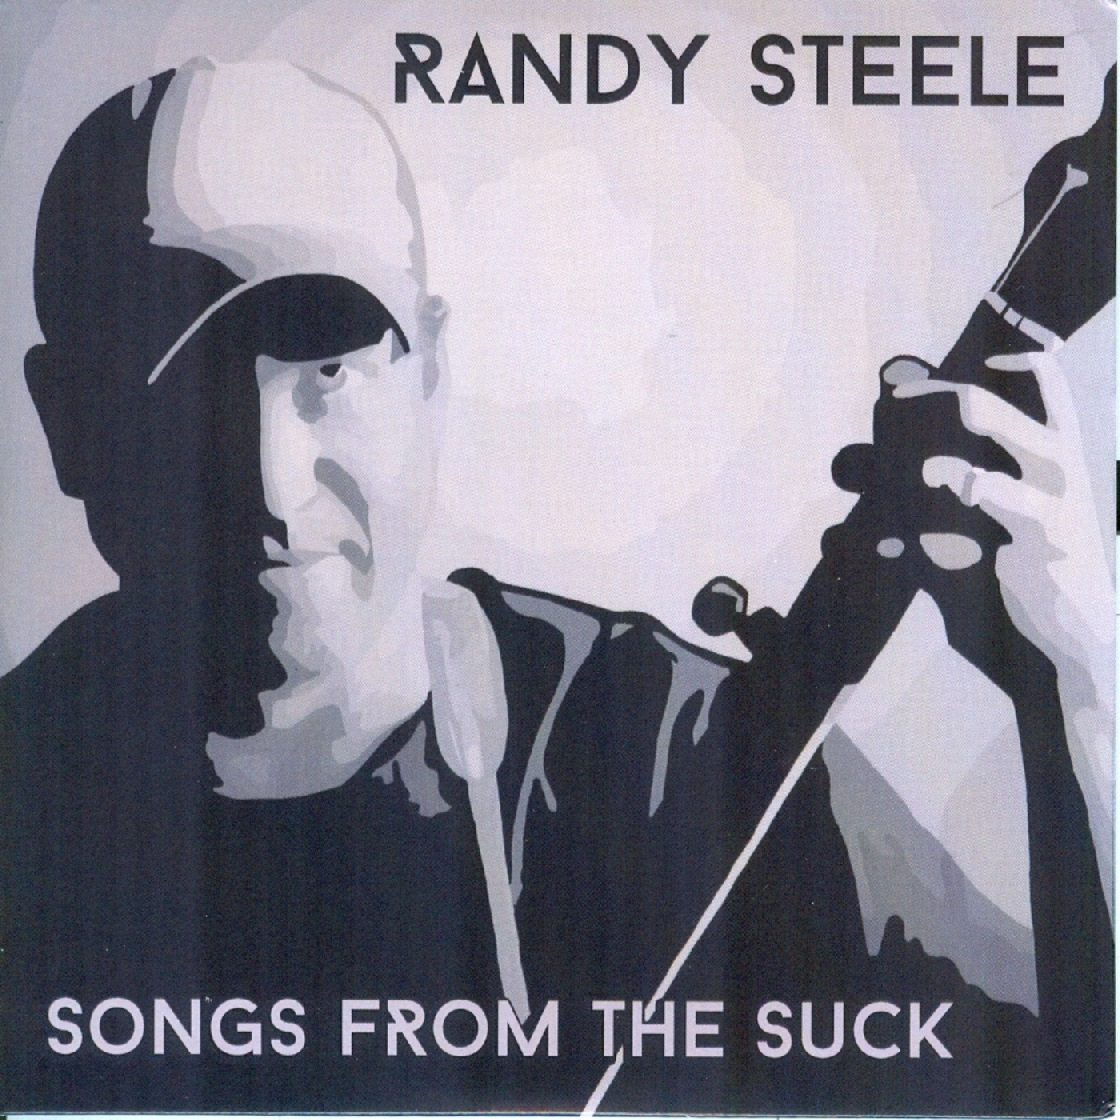  Randy Steele – Songs From The Suck